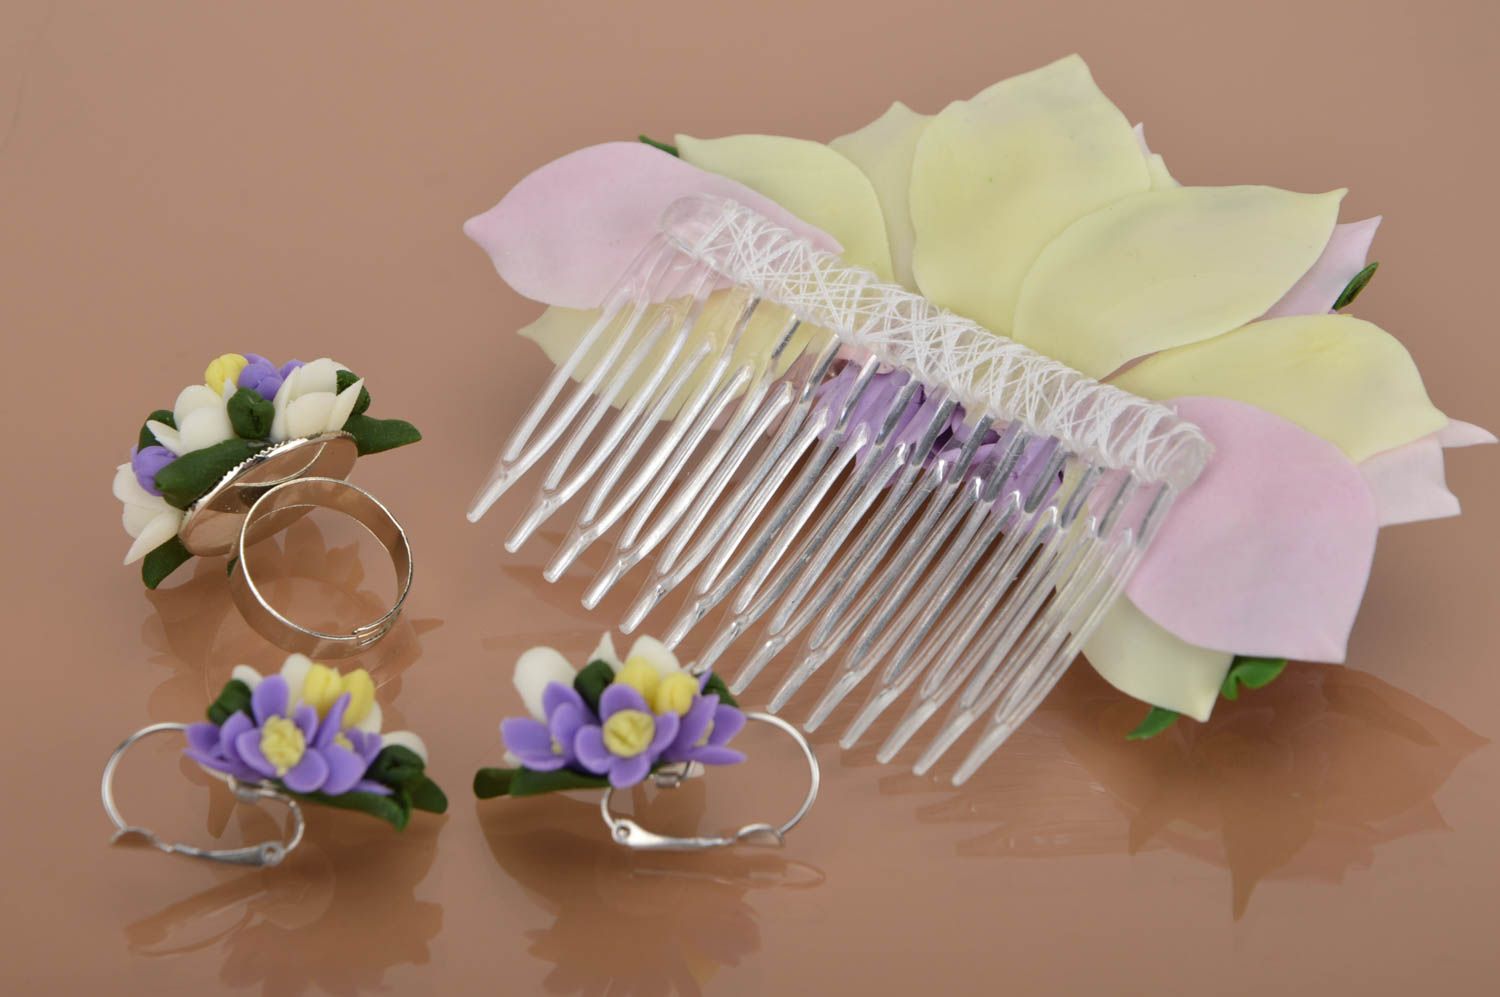 Handmade set of jewelry made of polymer clay 3 pieces ring earrings and comb photo 5